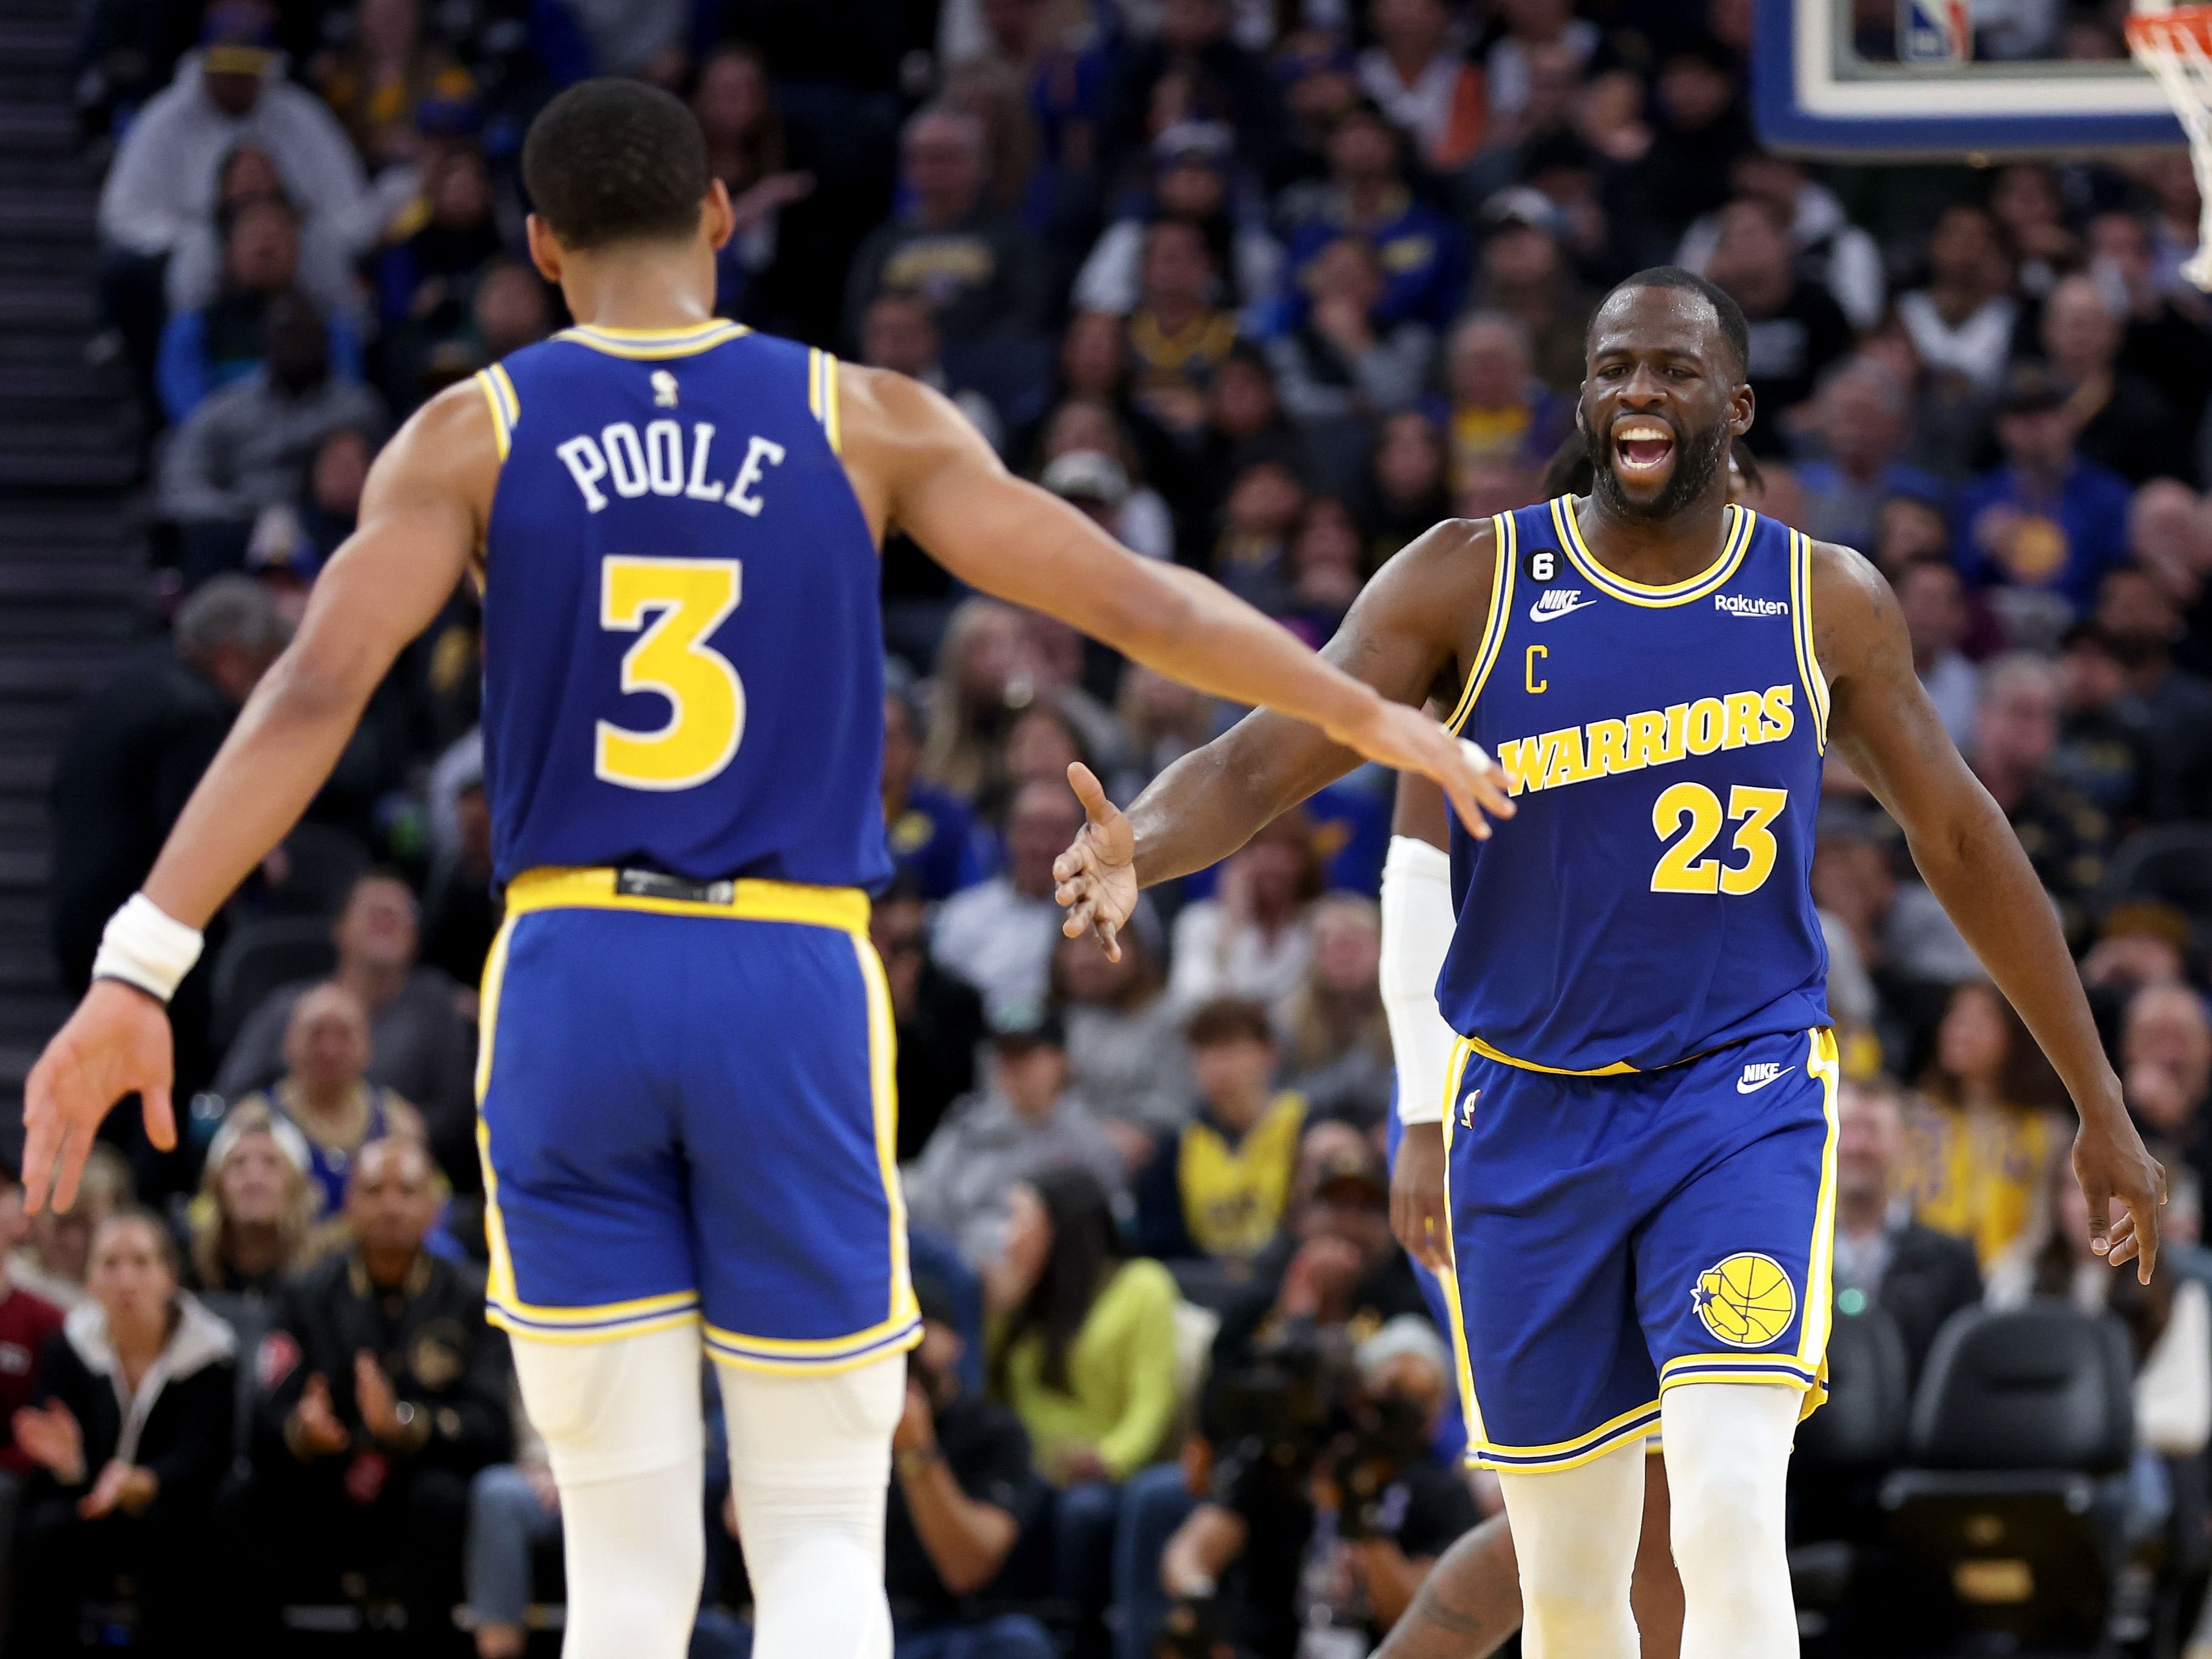 Jordan Poole and Draymond Green of the Golden State Warriors